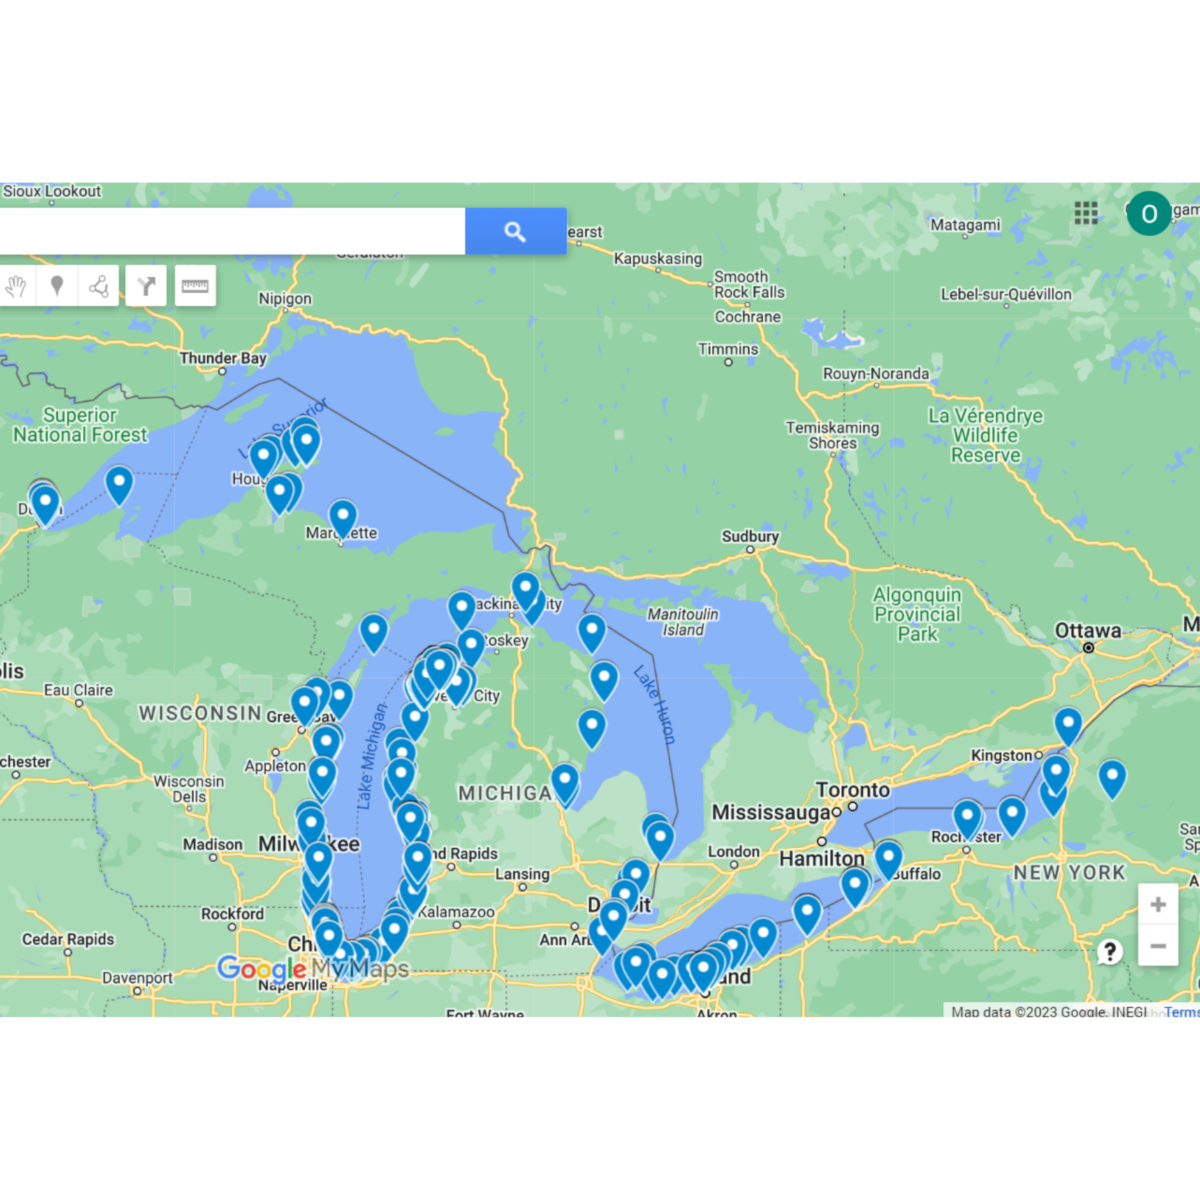 Great Lakes map showing cleanup locations across the lakes.